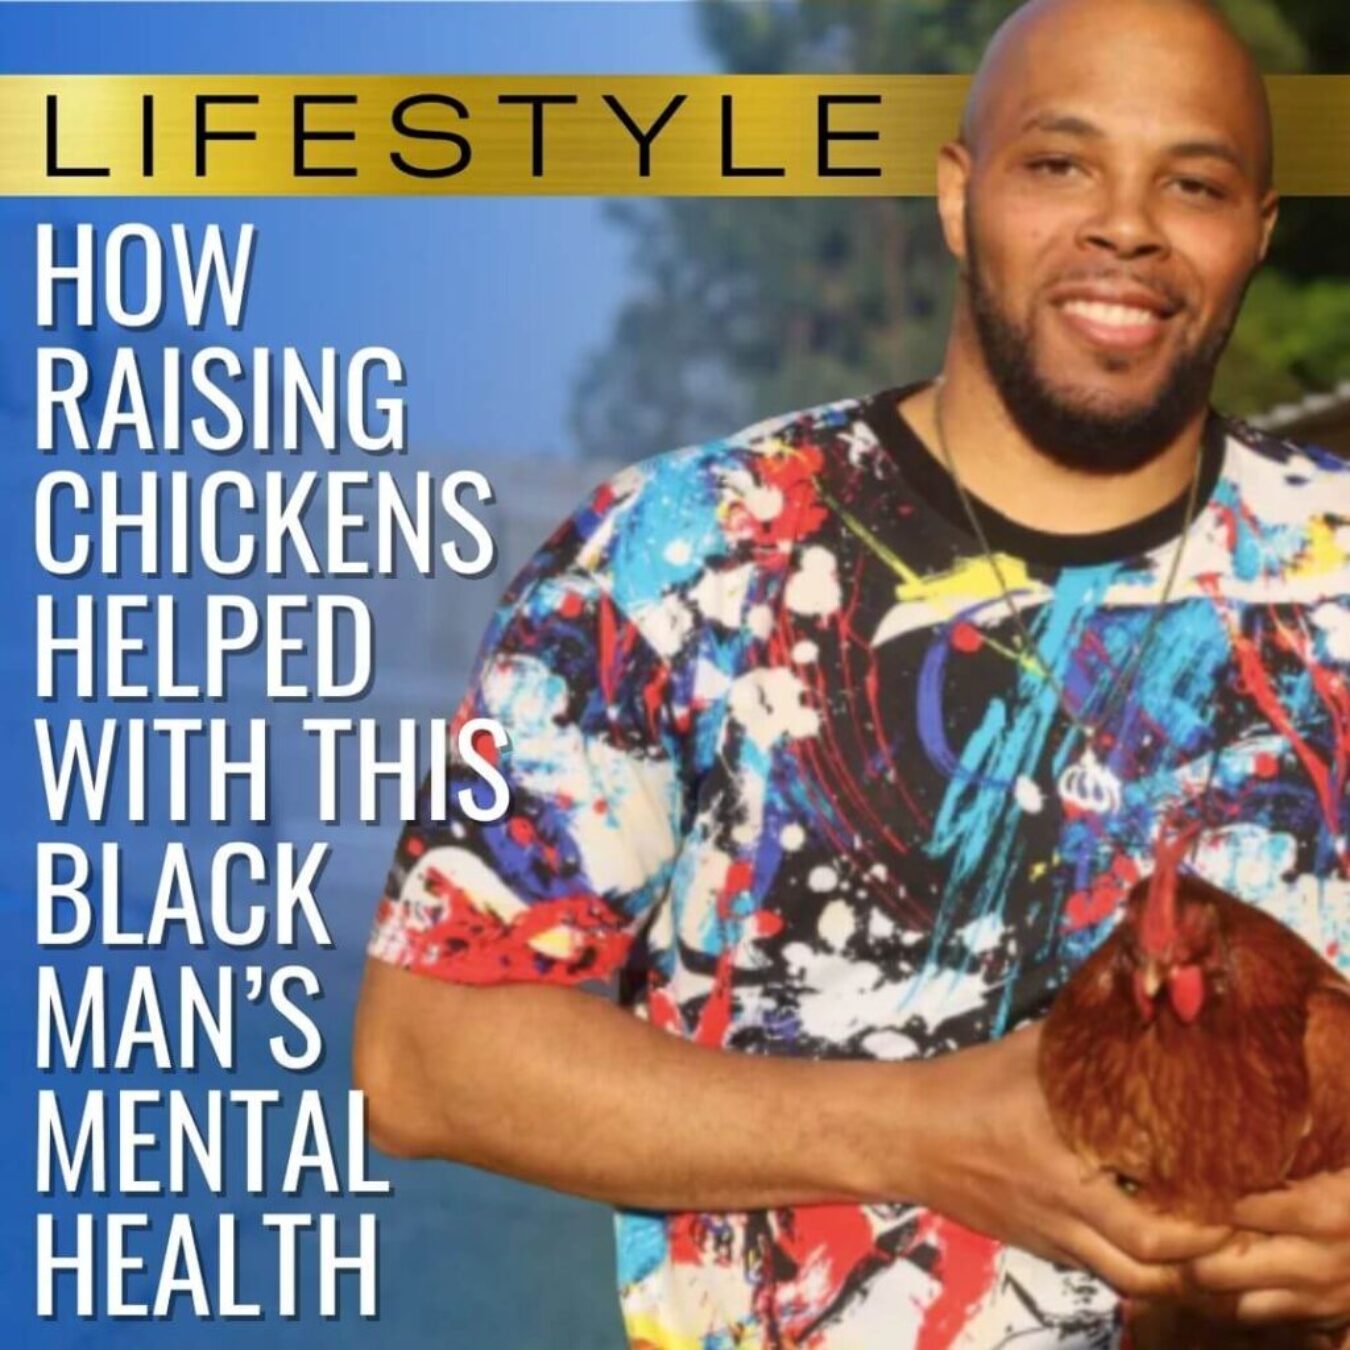 How Raising Chickens Helped With This Black Man’s Mental Health